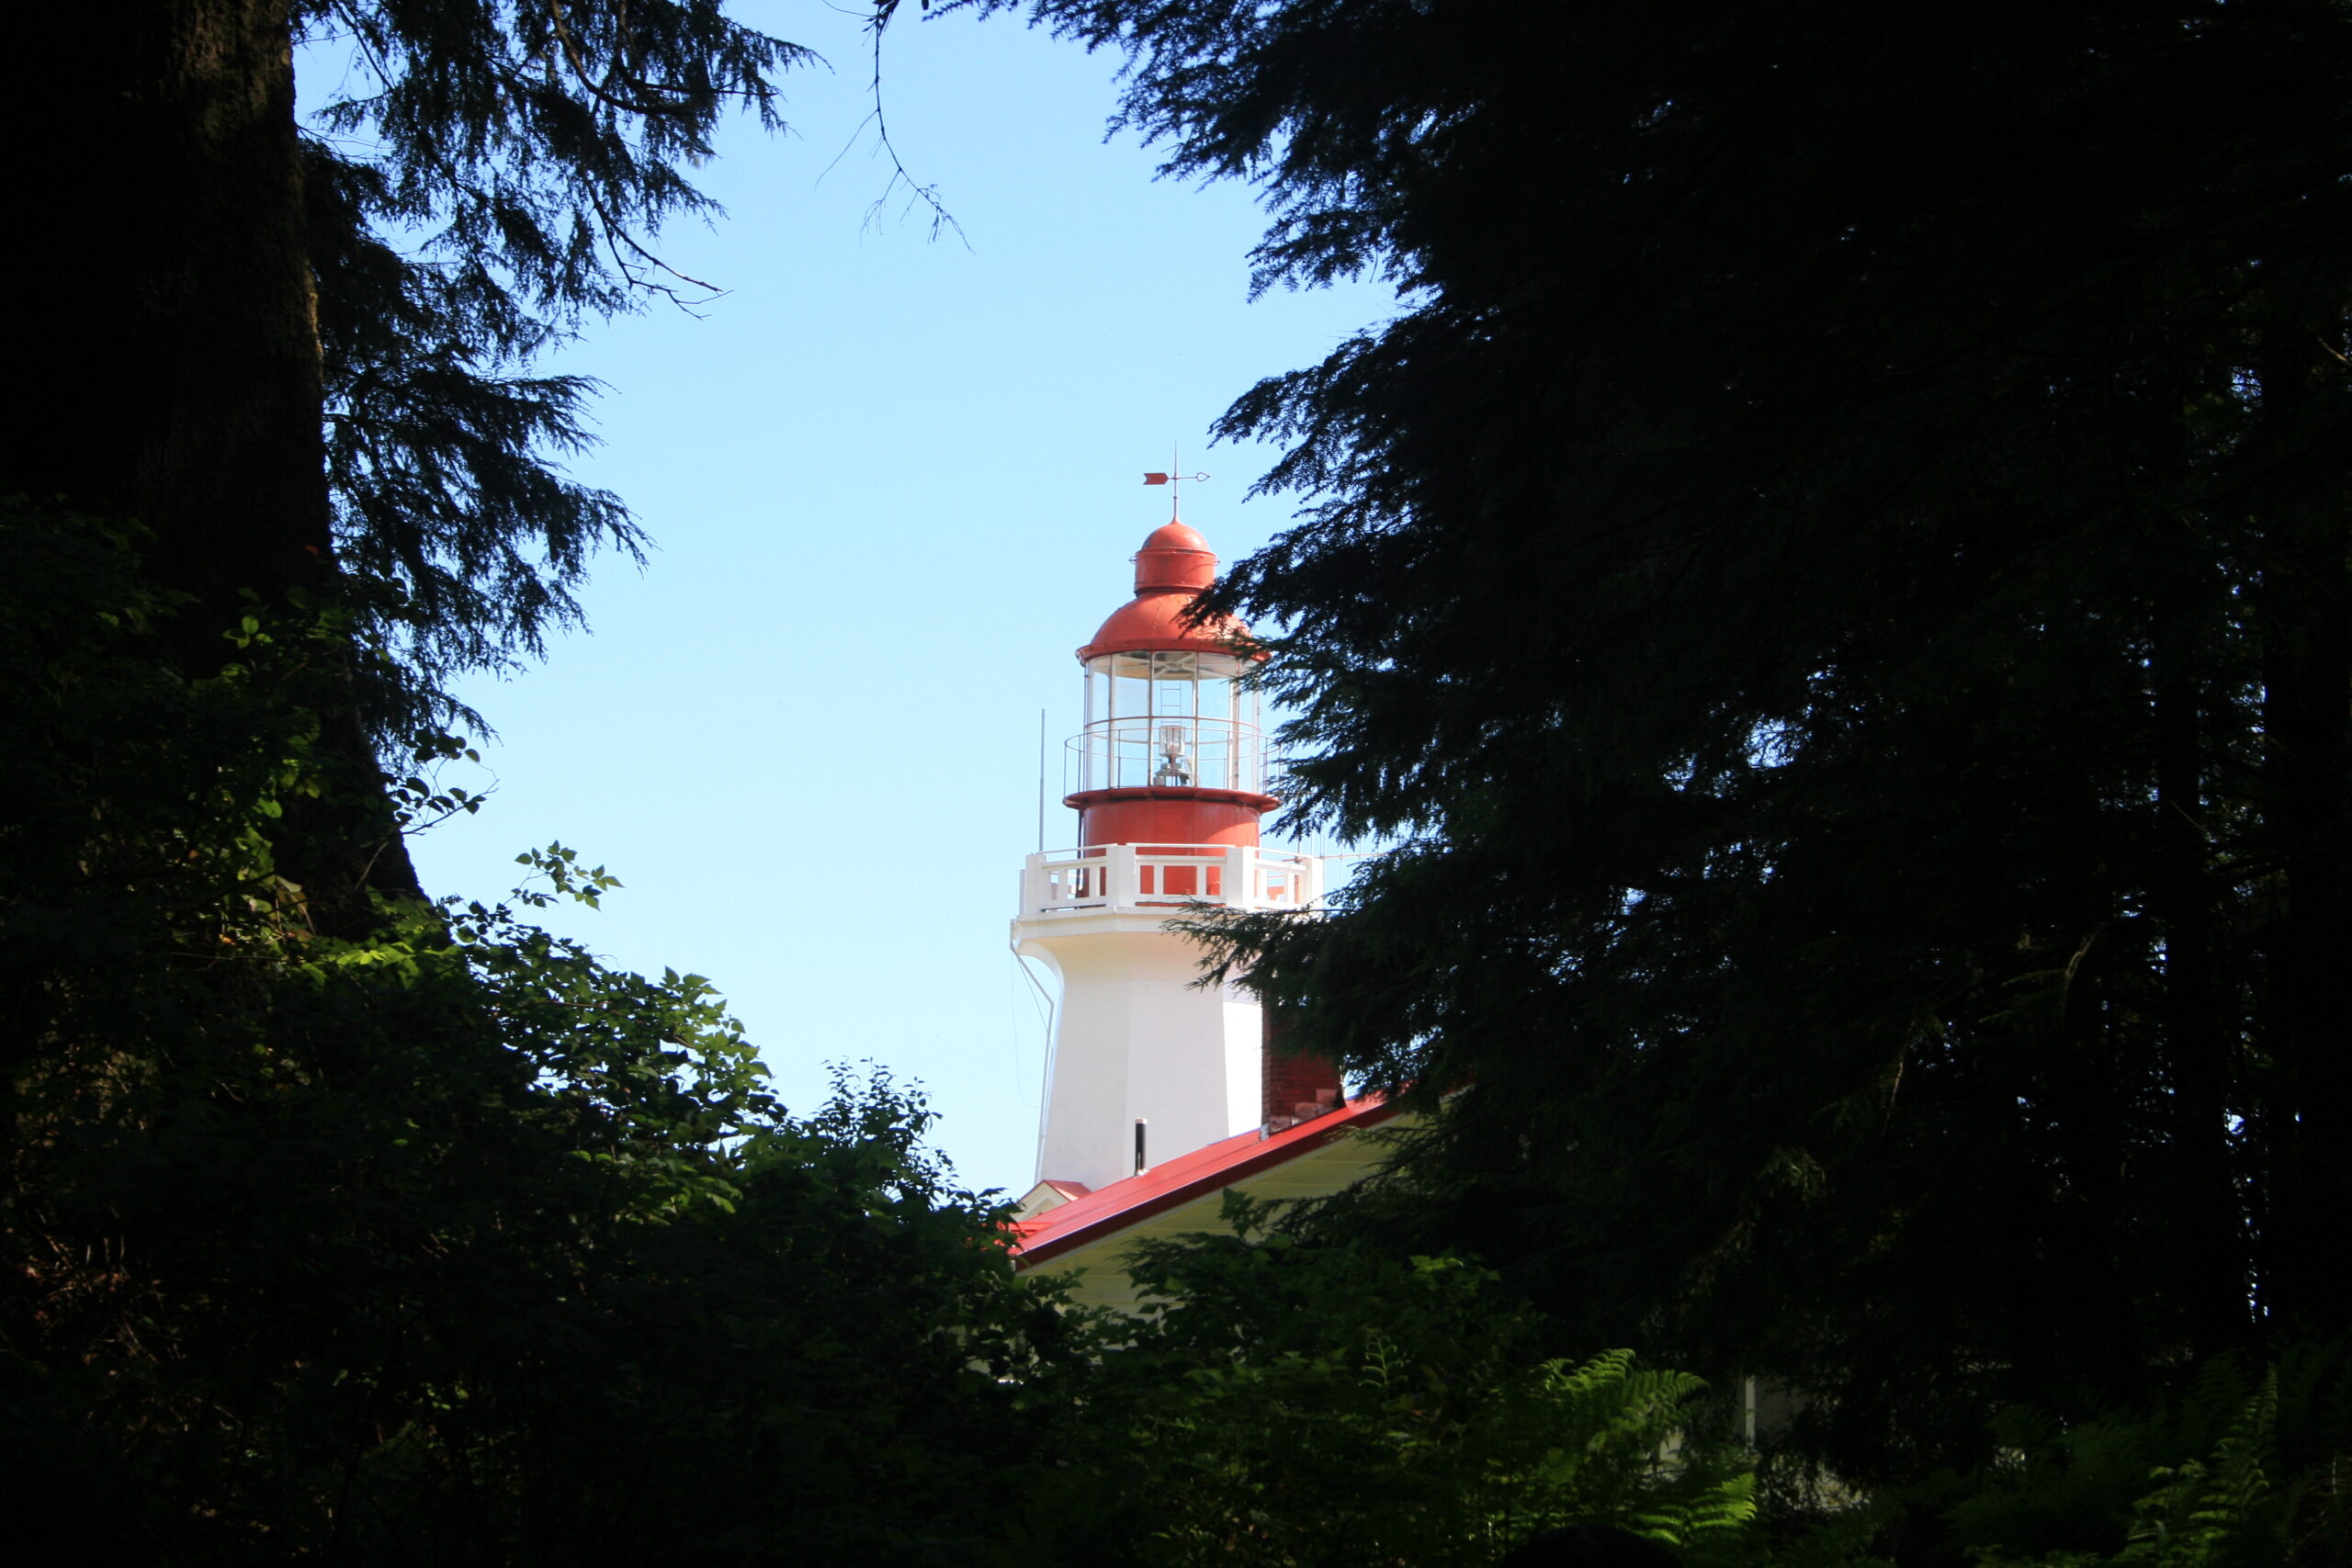 Carmanah Lighthouse peaks out through a gap in the forest